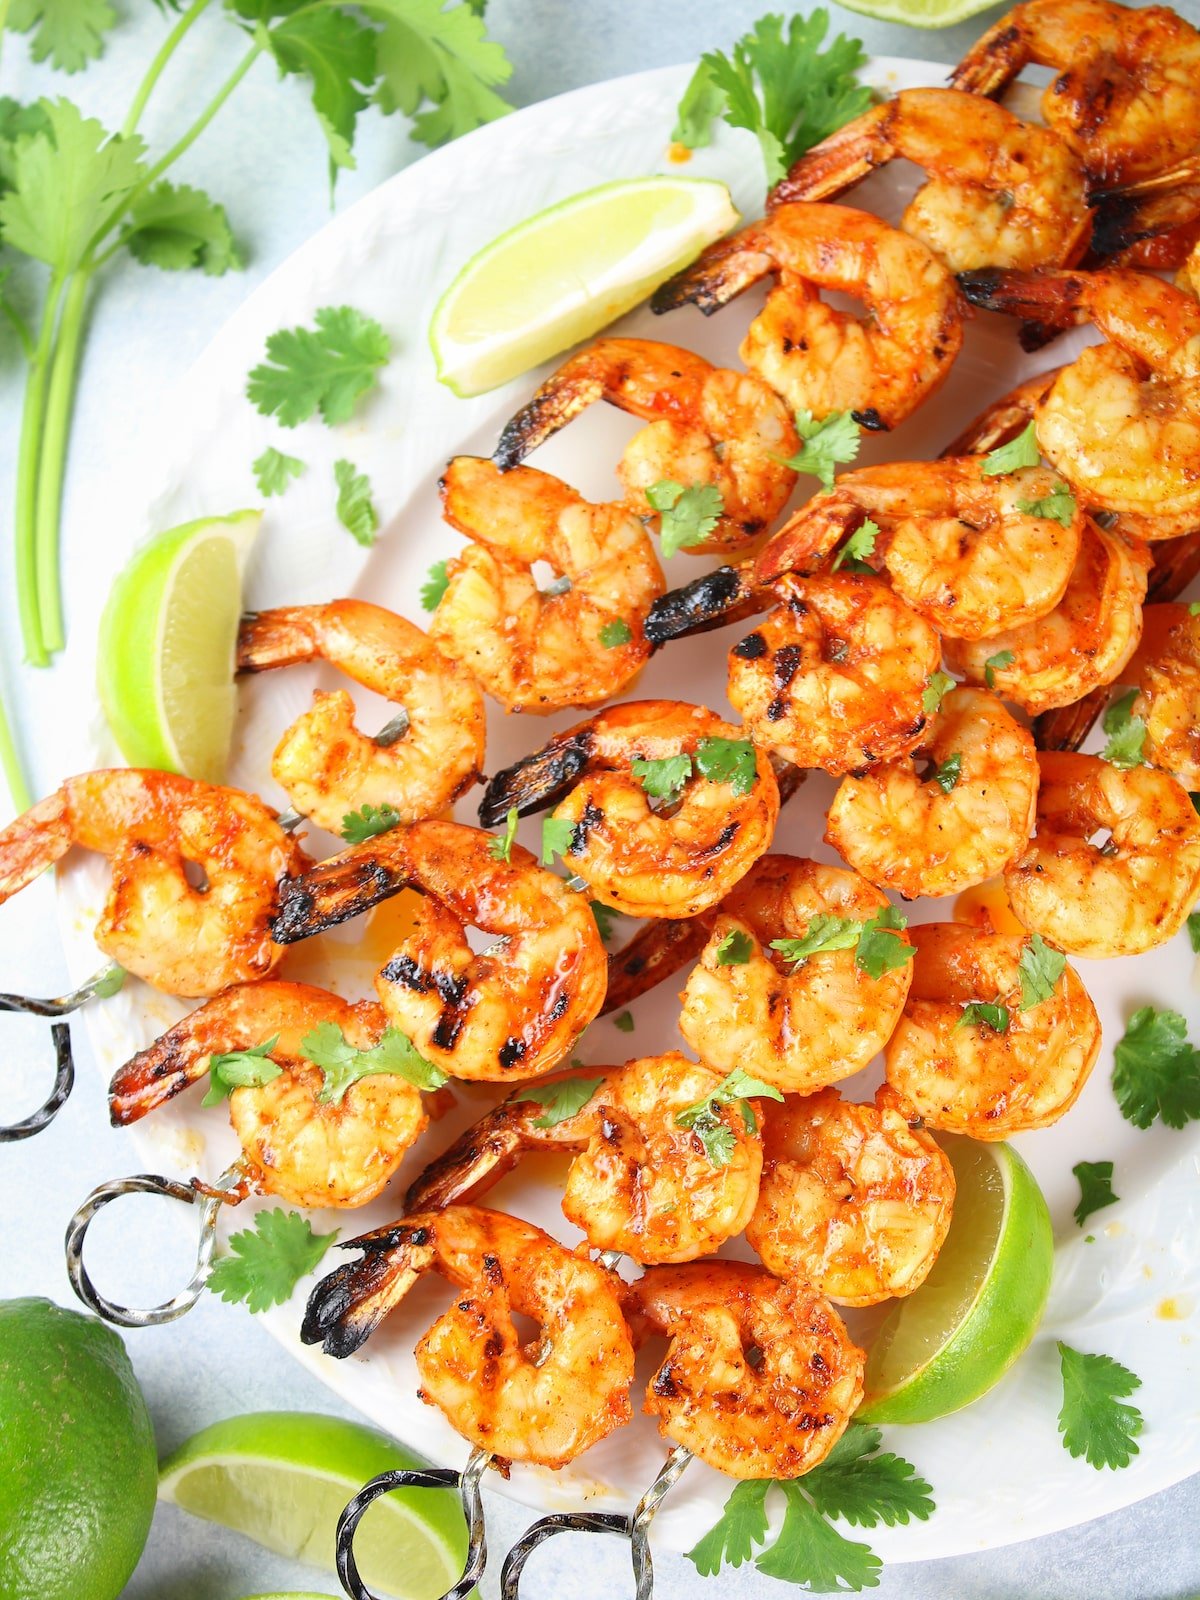 A half platter with cooked shrimp on skewers.